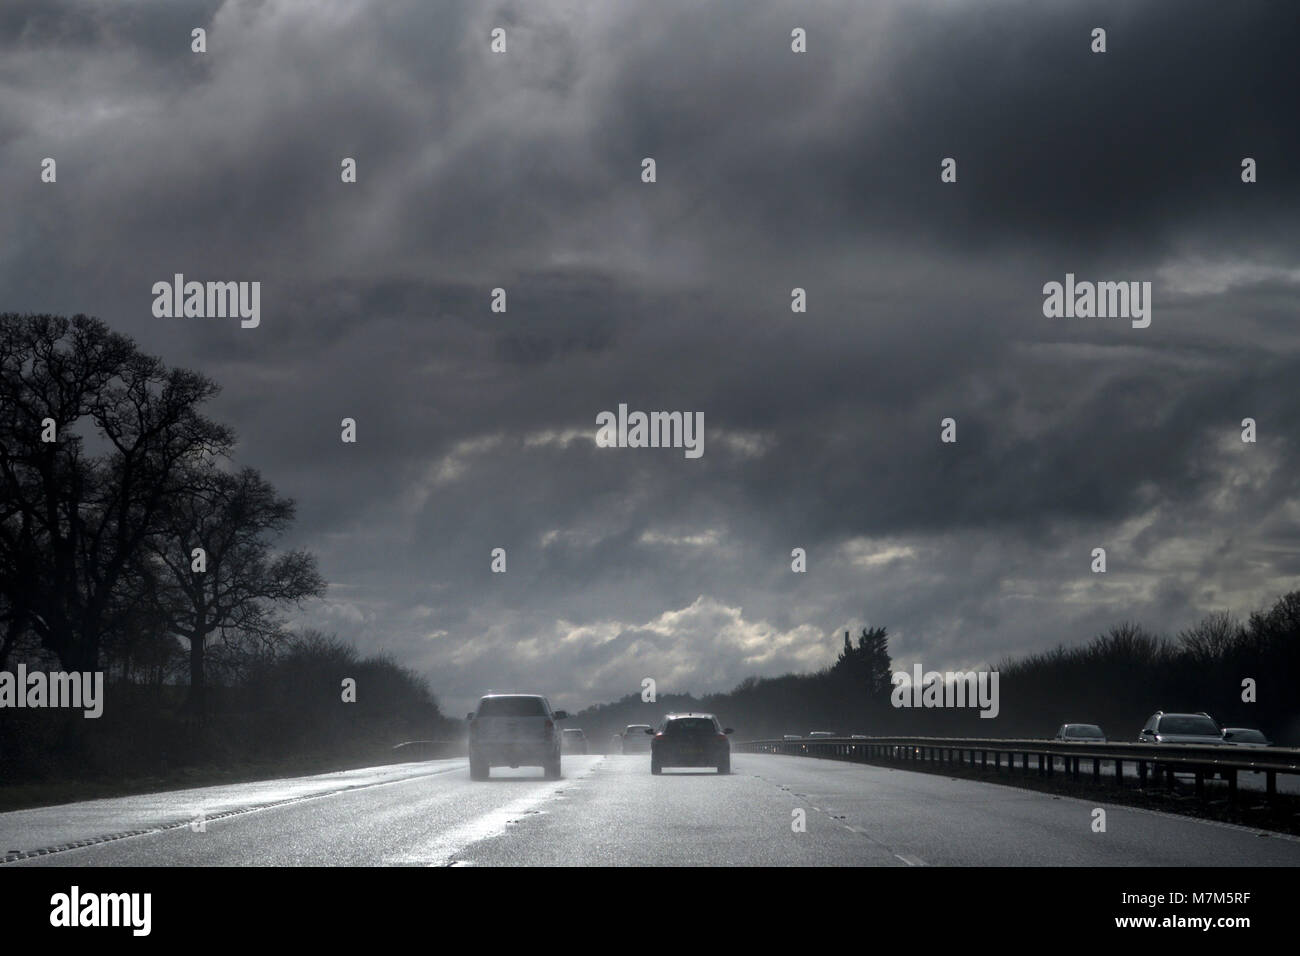 Spray from surface water on the M5 motorway creates poor visibility and dangerous driving conditions Stock Photo